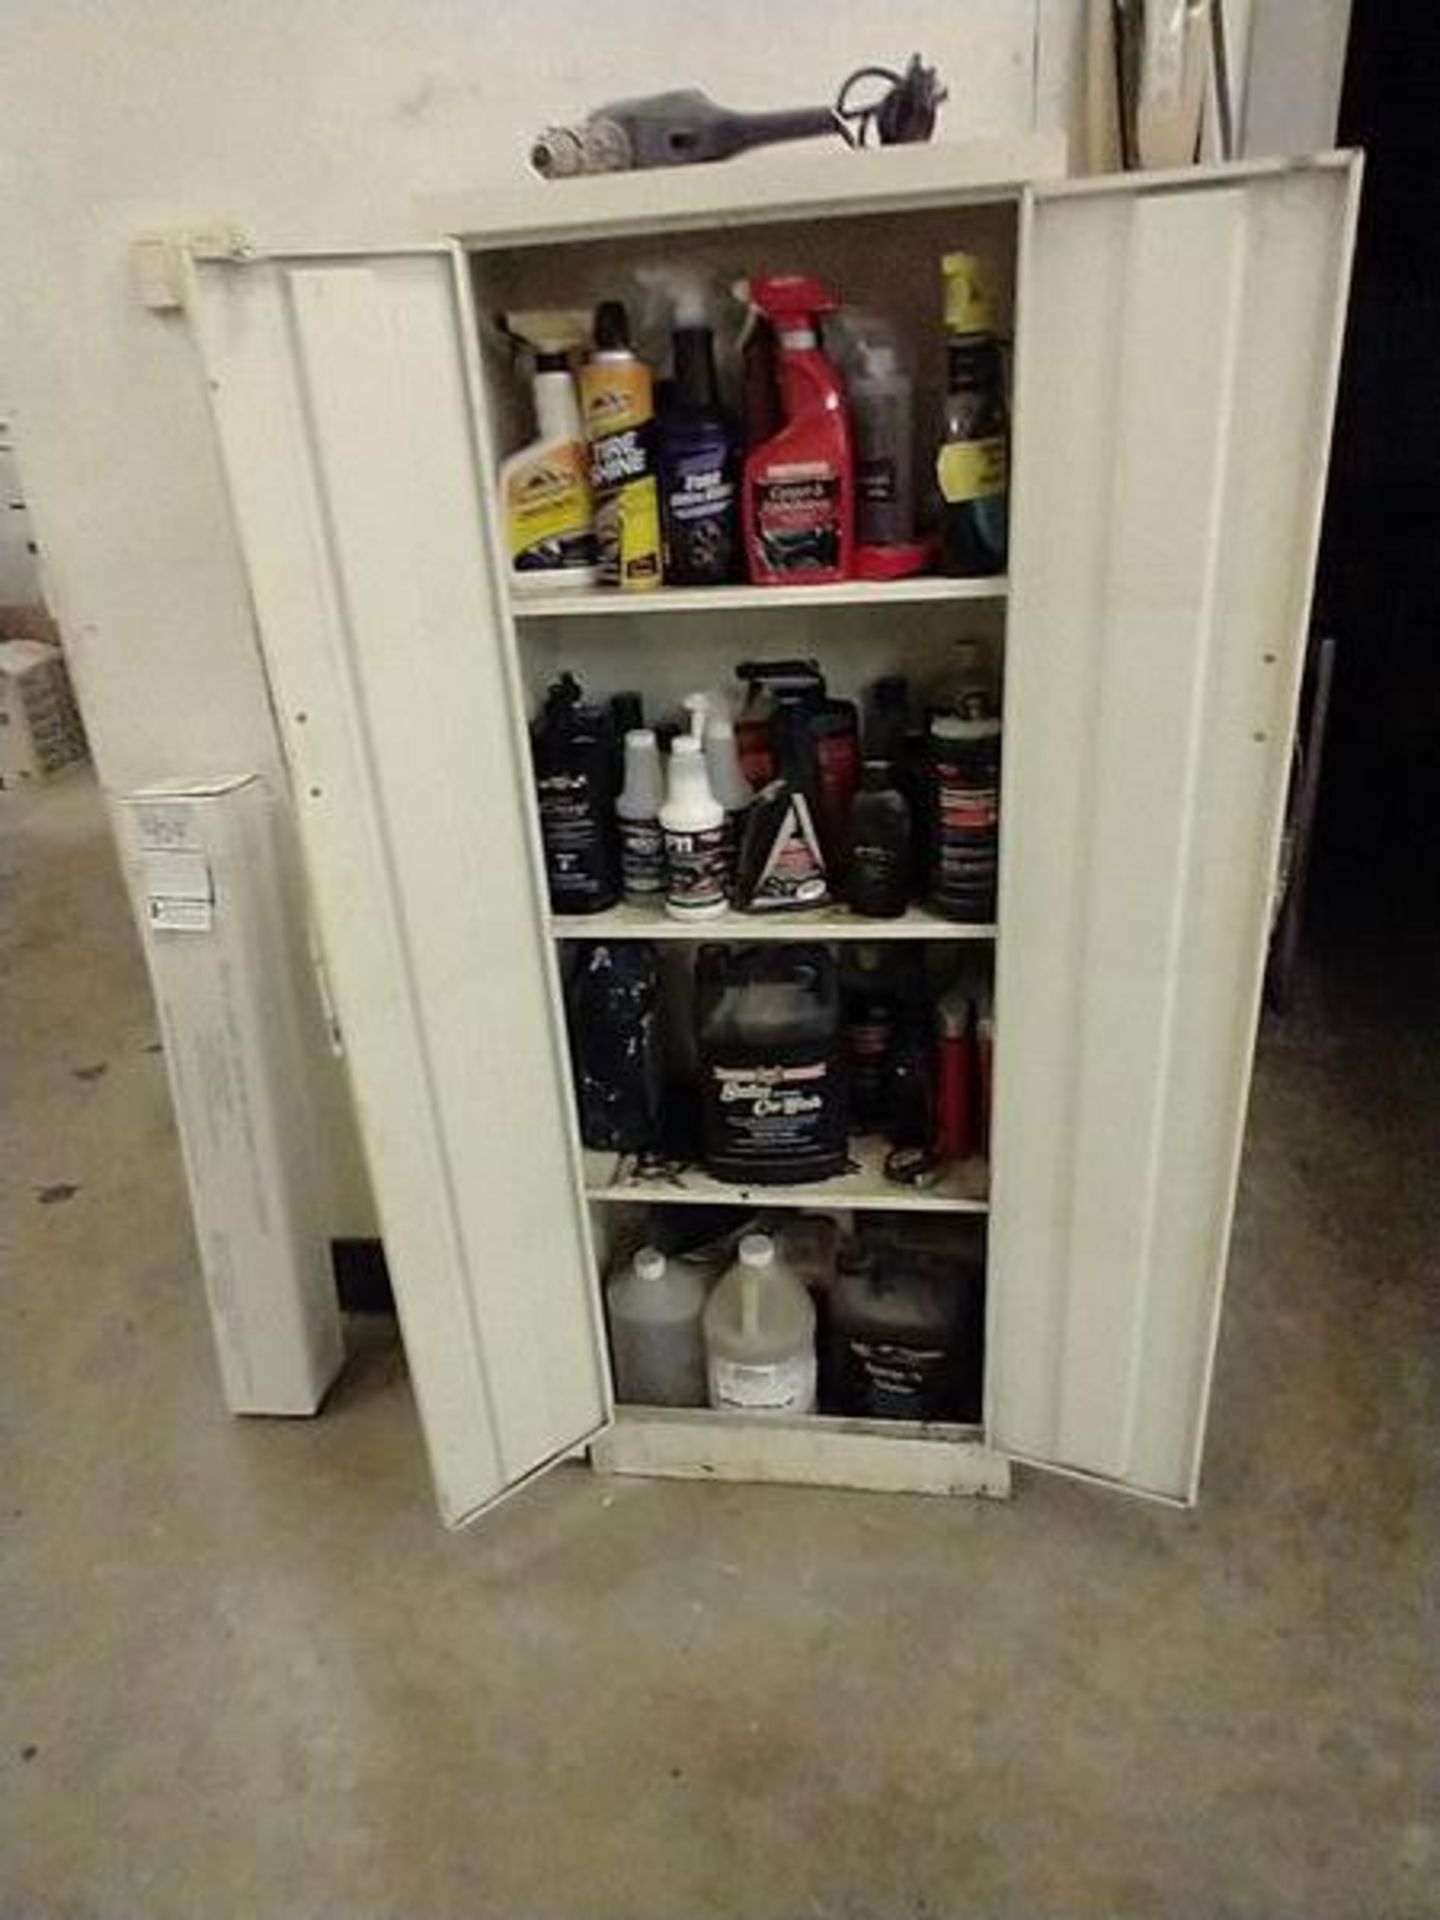 2 DOOR STORAGE CABINET WITH CAR CLEANERS AND WAXES - Image 2 of 6